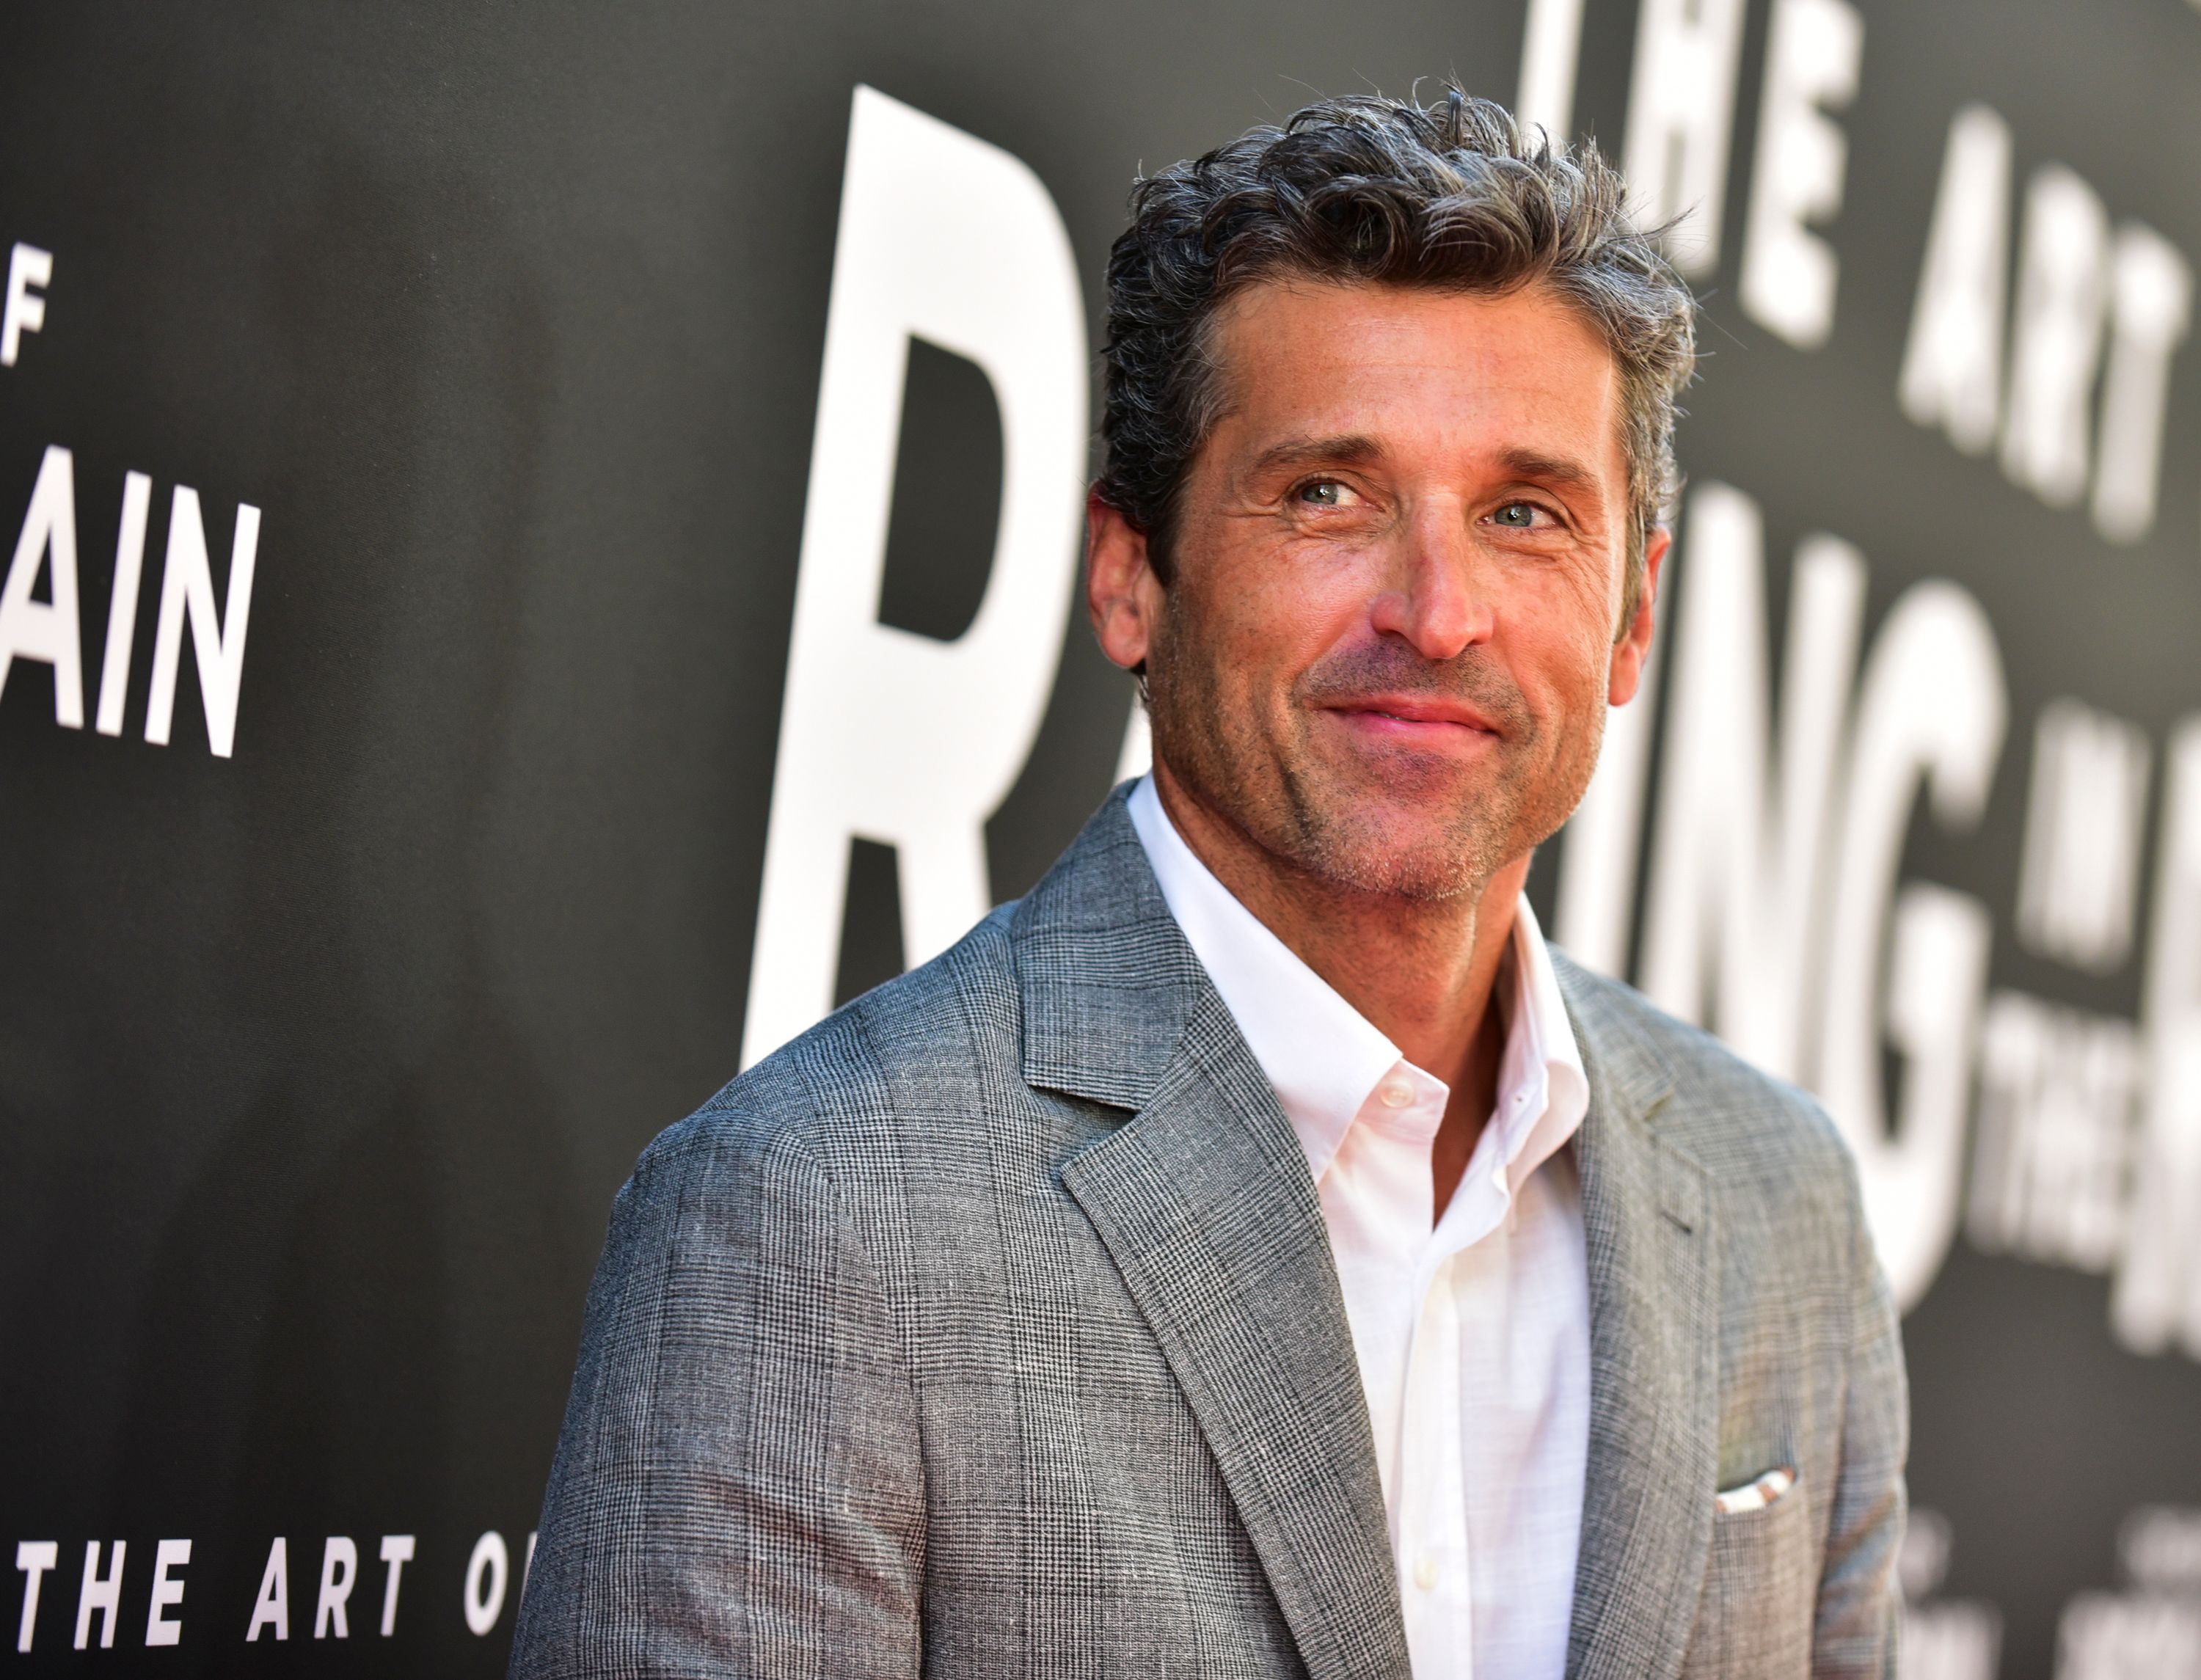 'Grey's Anatomy' Star Patrick Dempsey Shows up One More Time in This